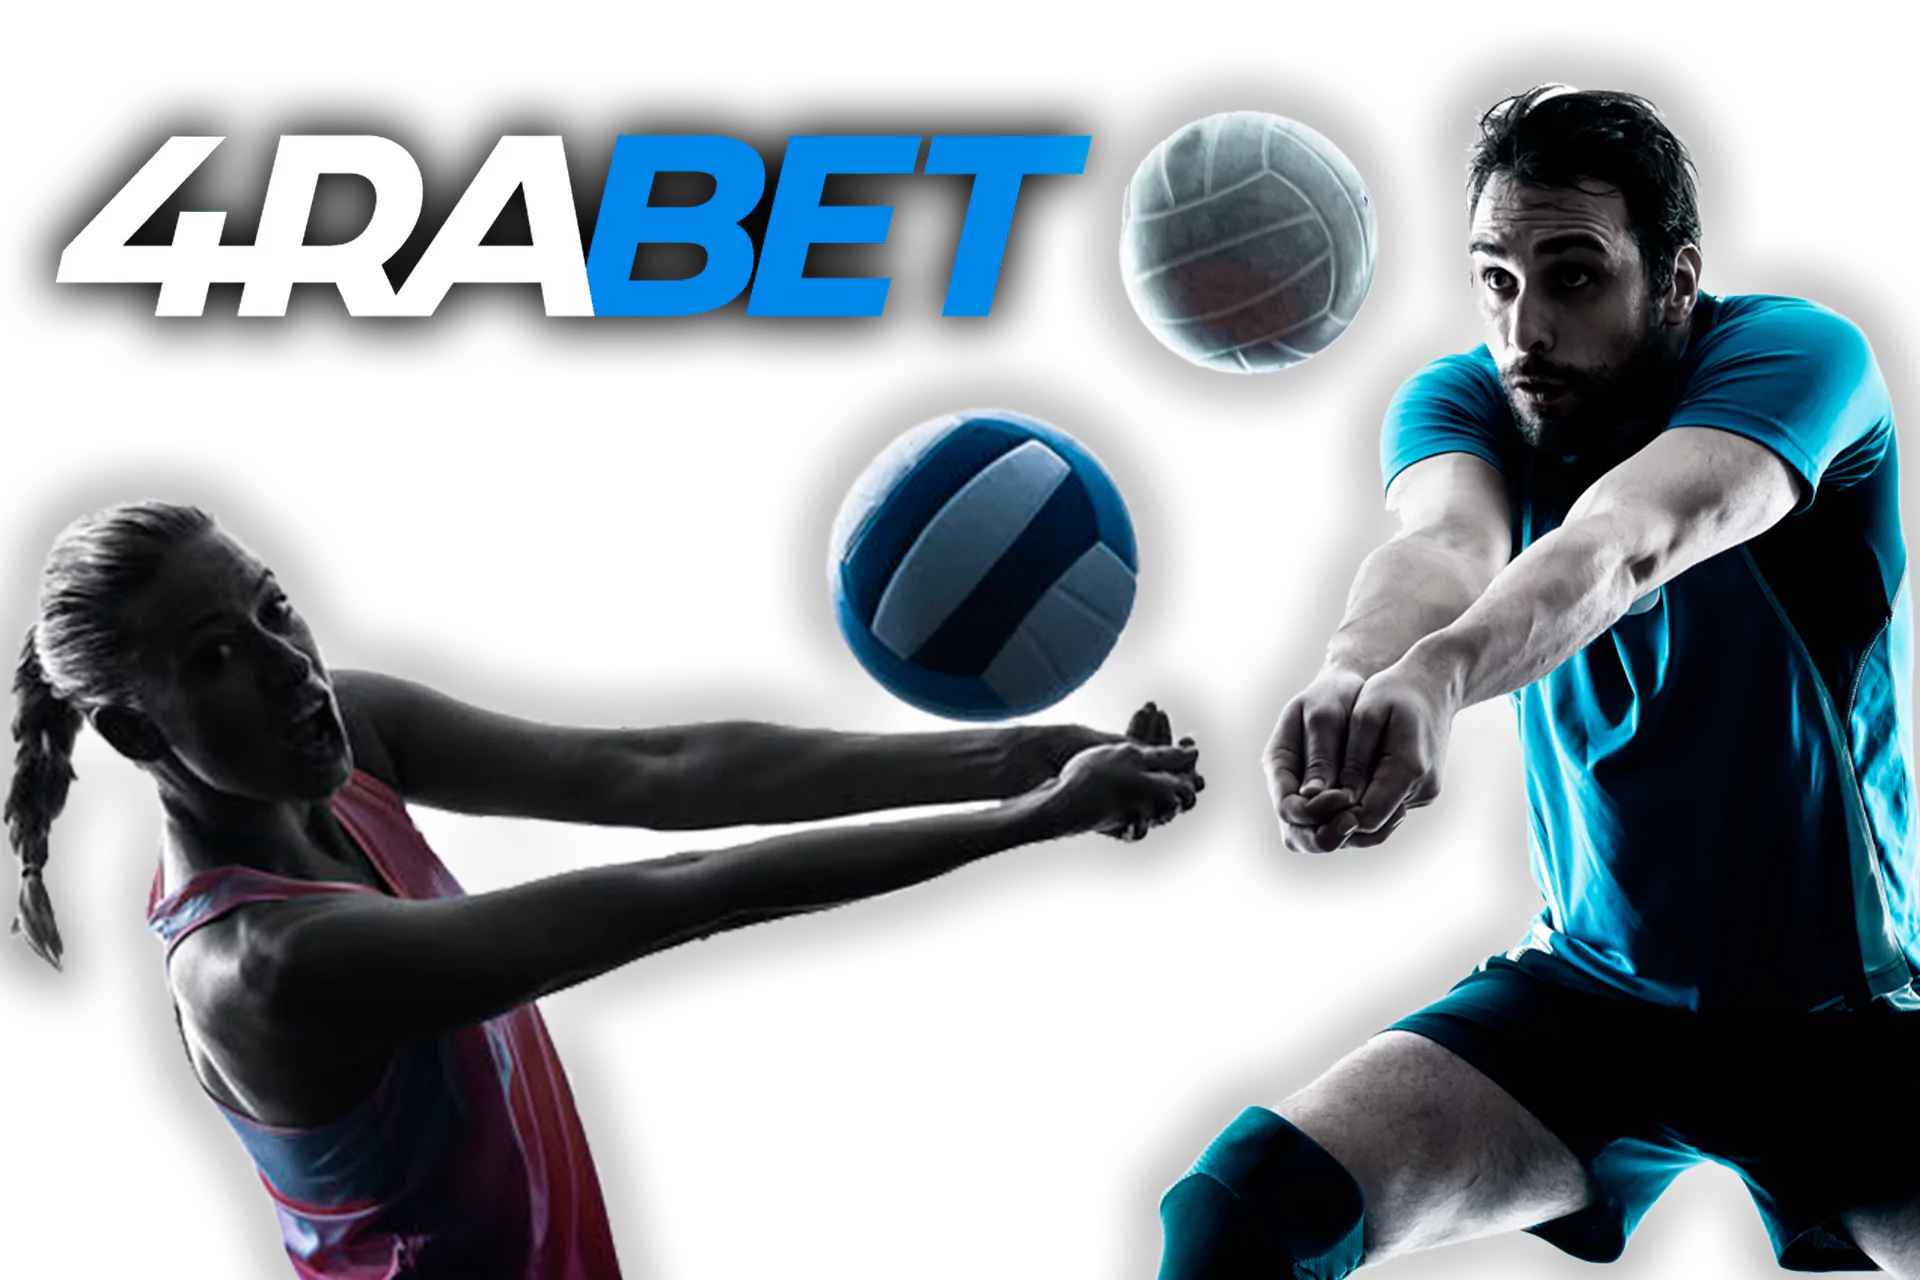 Learn how to bet on volleyballat the 4rabet site and in the app.